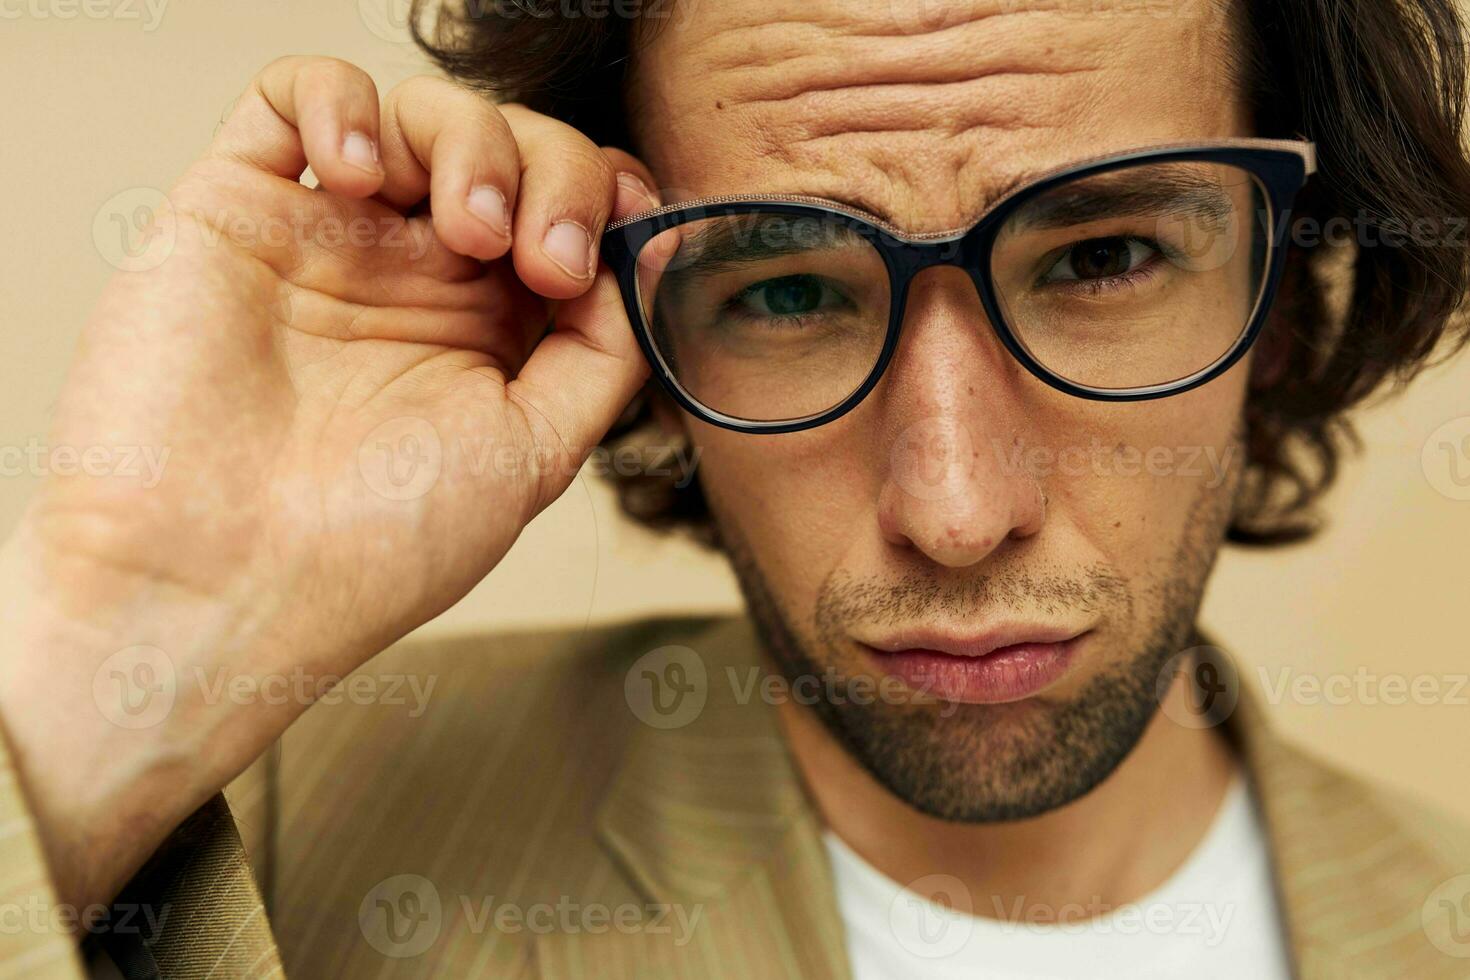 handsome man with glasses emotions gesture hands posing isolated background photo